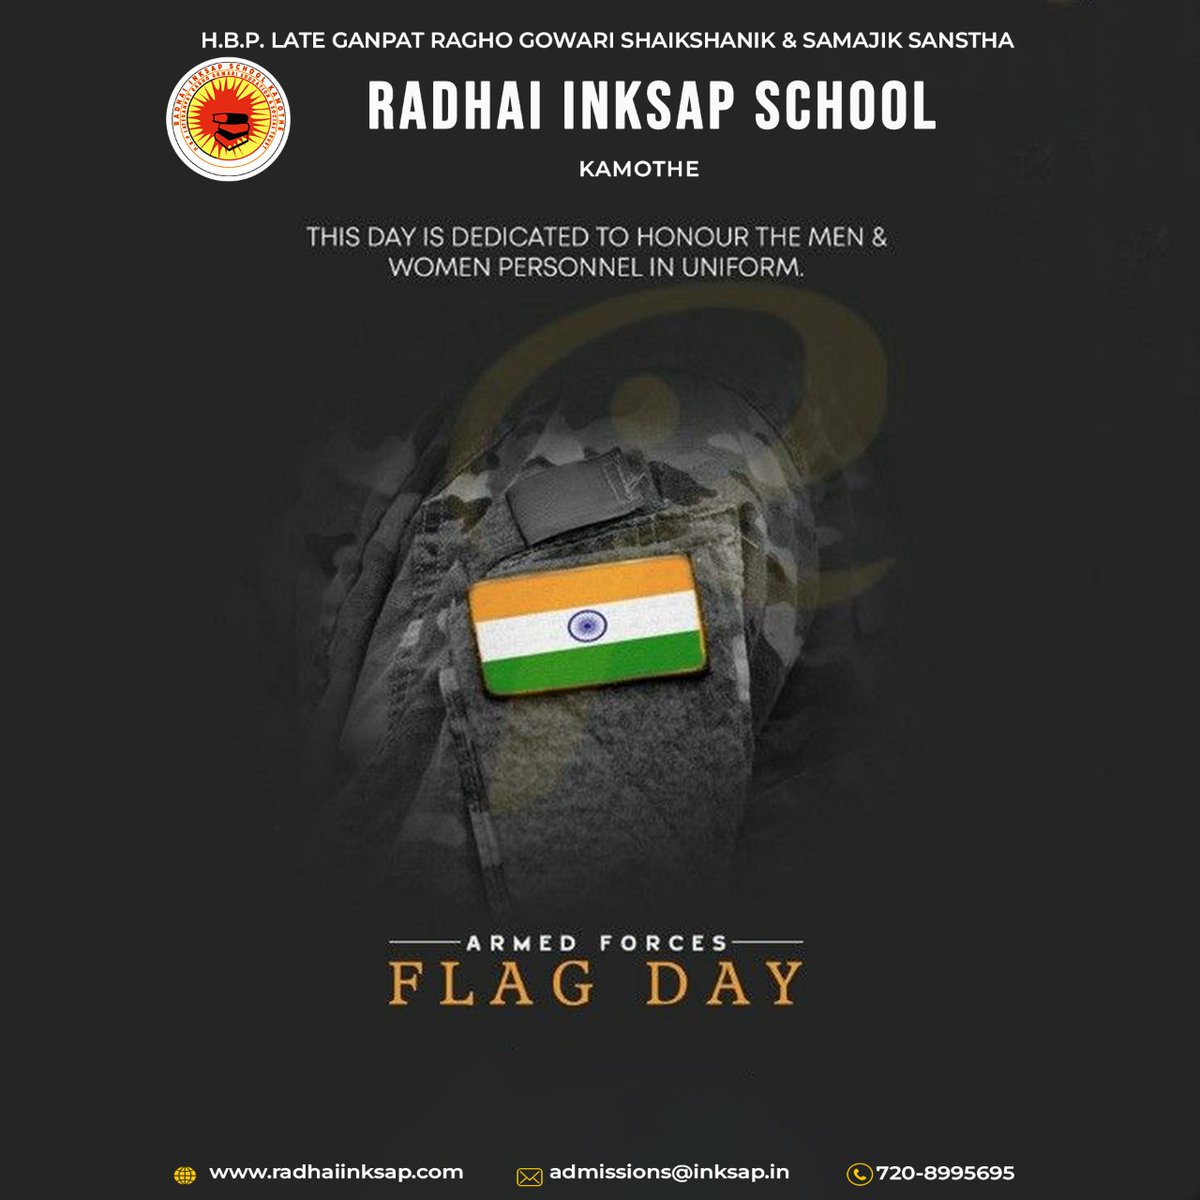 The Armed Forces Flag Day is a day to remember the bravery, courage and sacrifice of our armed forces. 

Tributes to the gallant heroes of the nation on the Armed Forces Flag Day!
#flagday2022#radhaiinksapschool#ris